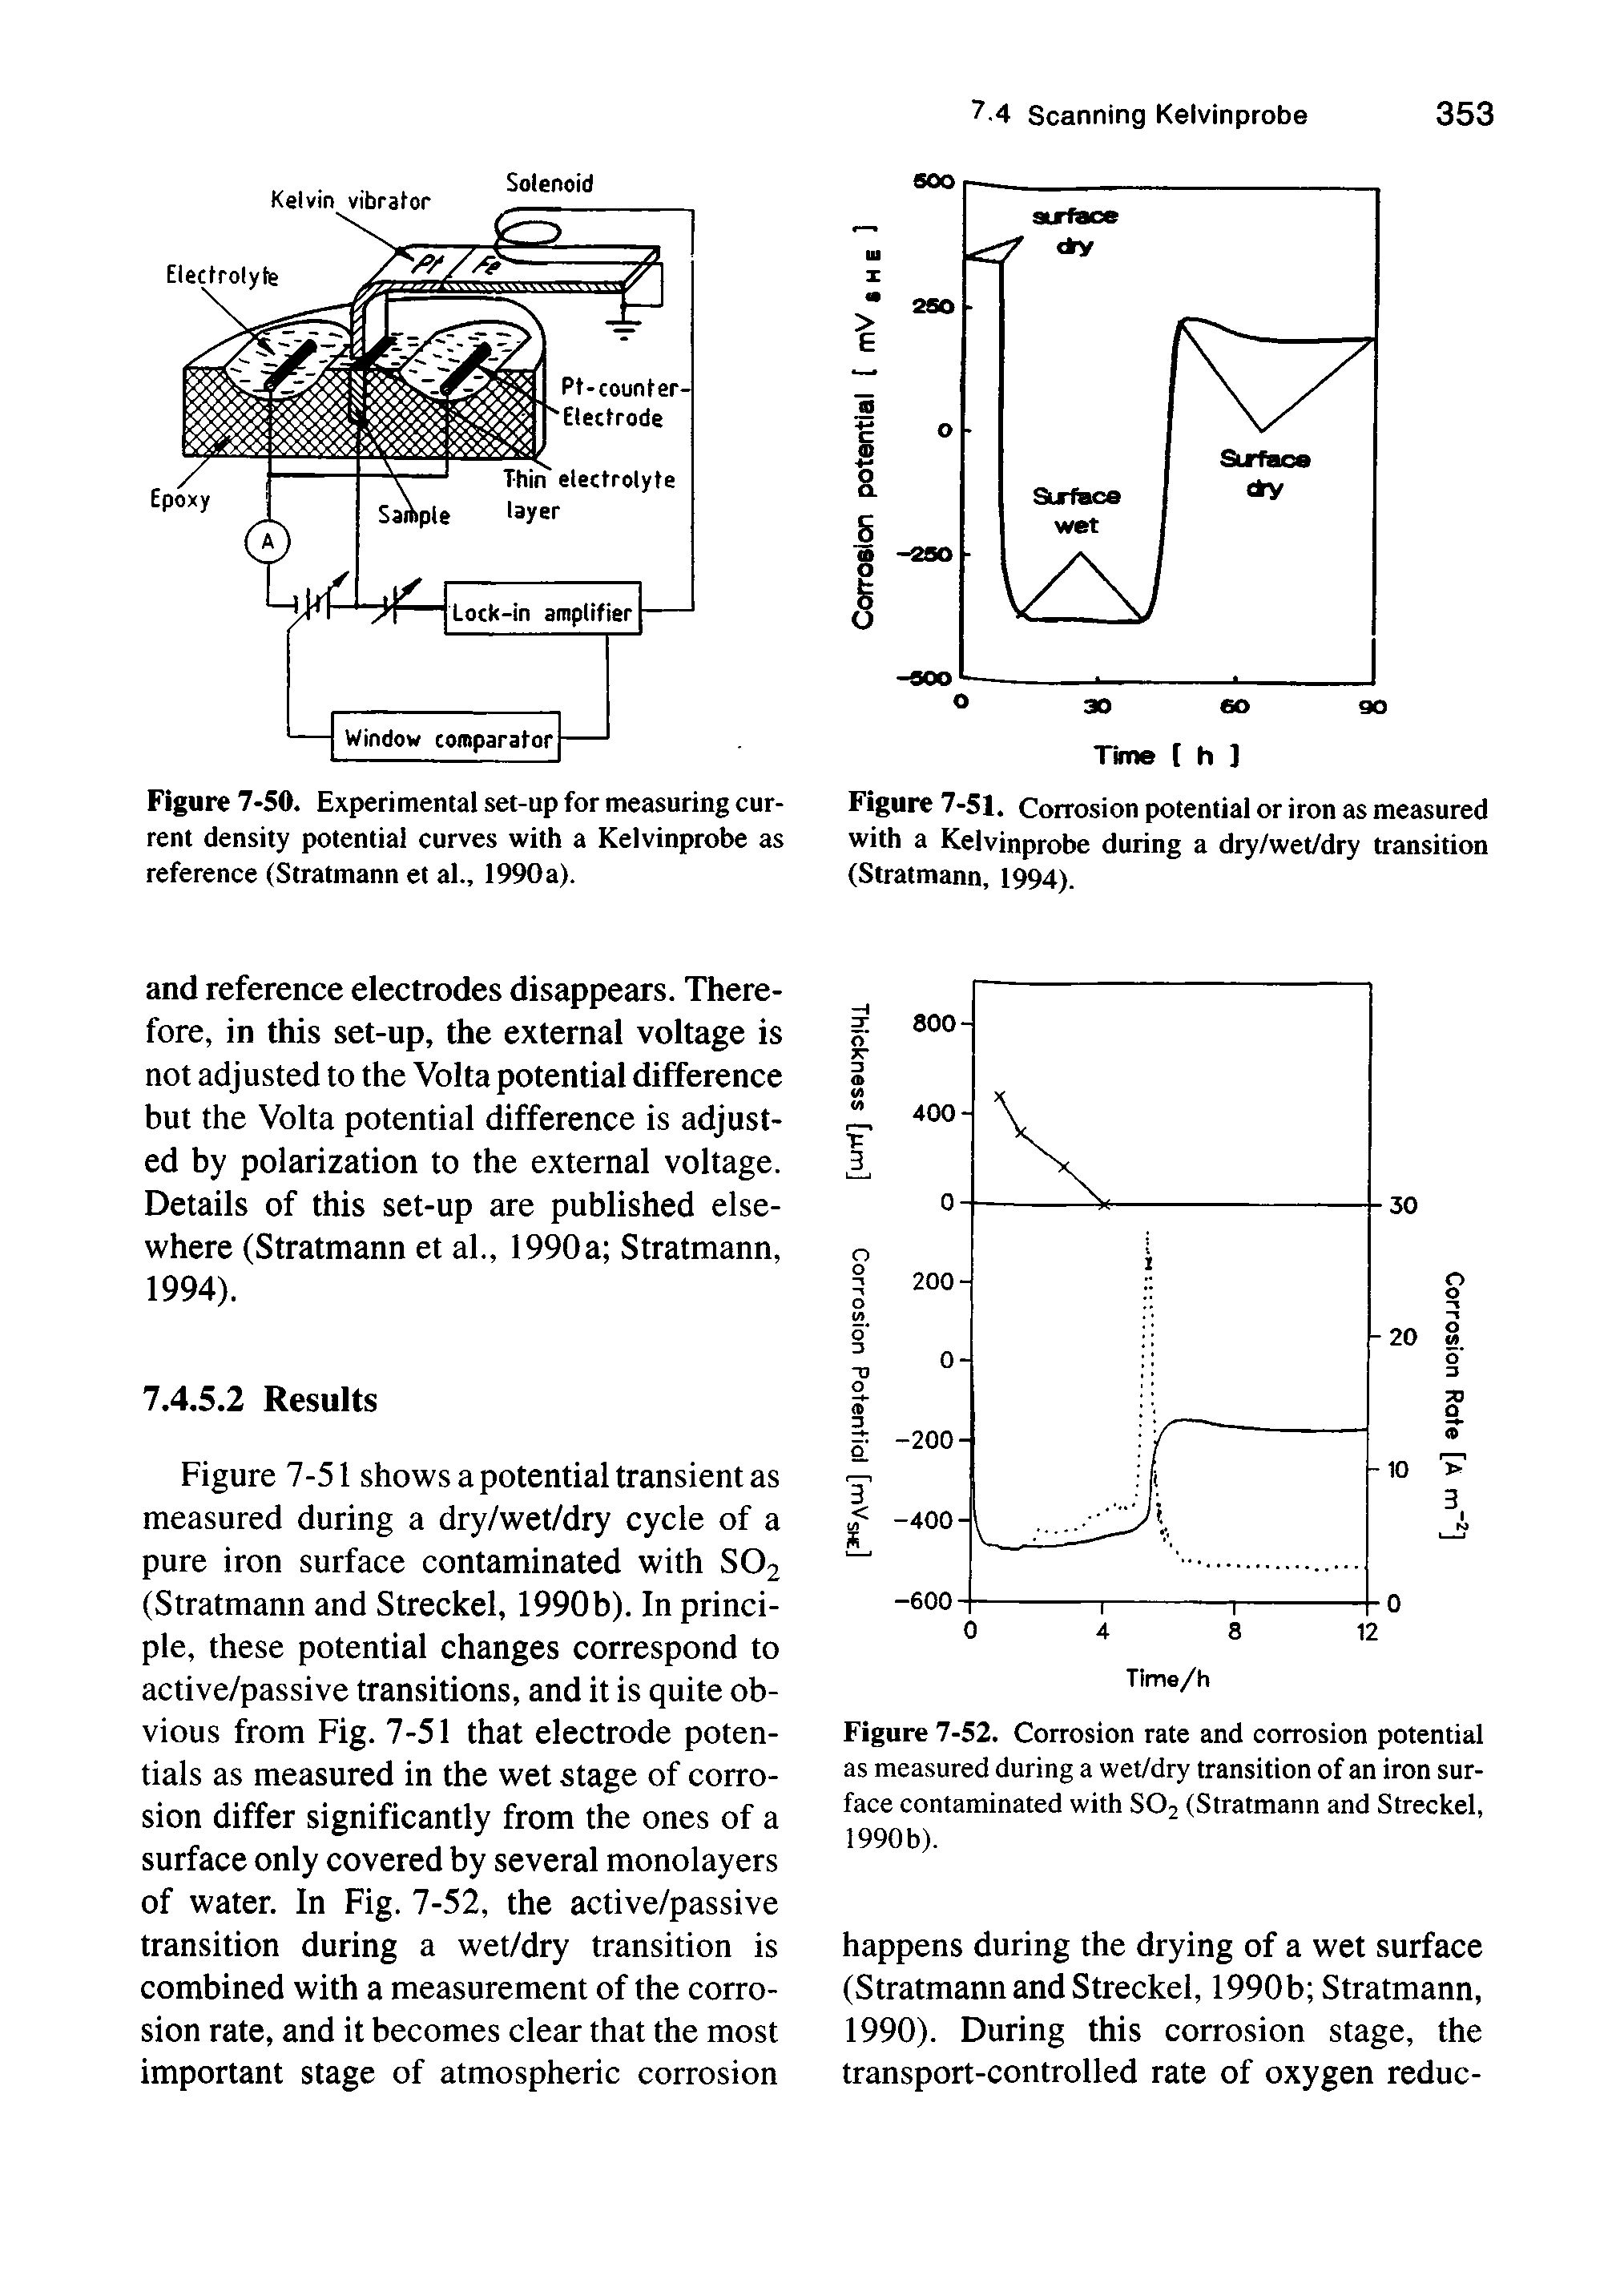 Figure 7-52. Corrosion rate and corrosion potential as measured during a wet/dry transition of an iron surface contaminated with SO2 (Stratmann and Streckel, 1990 b).